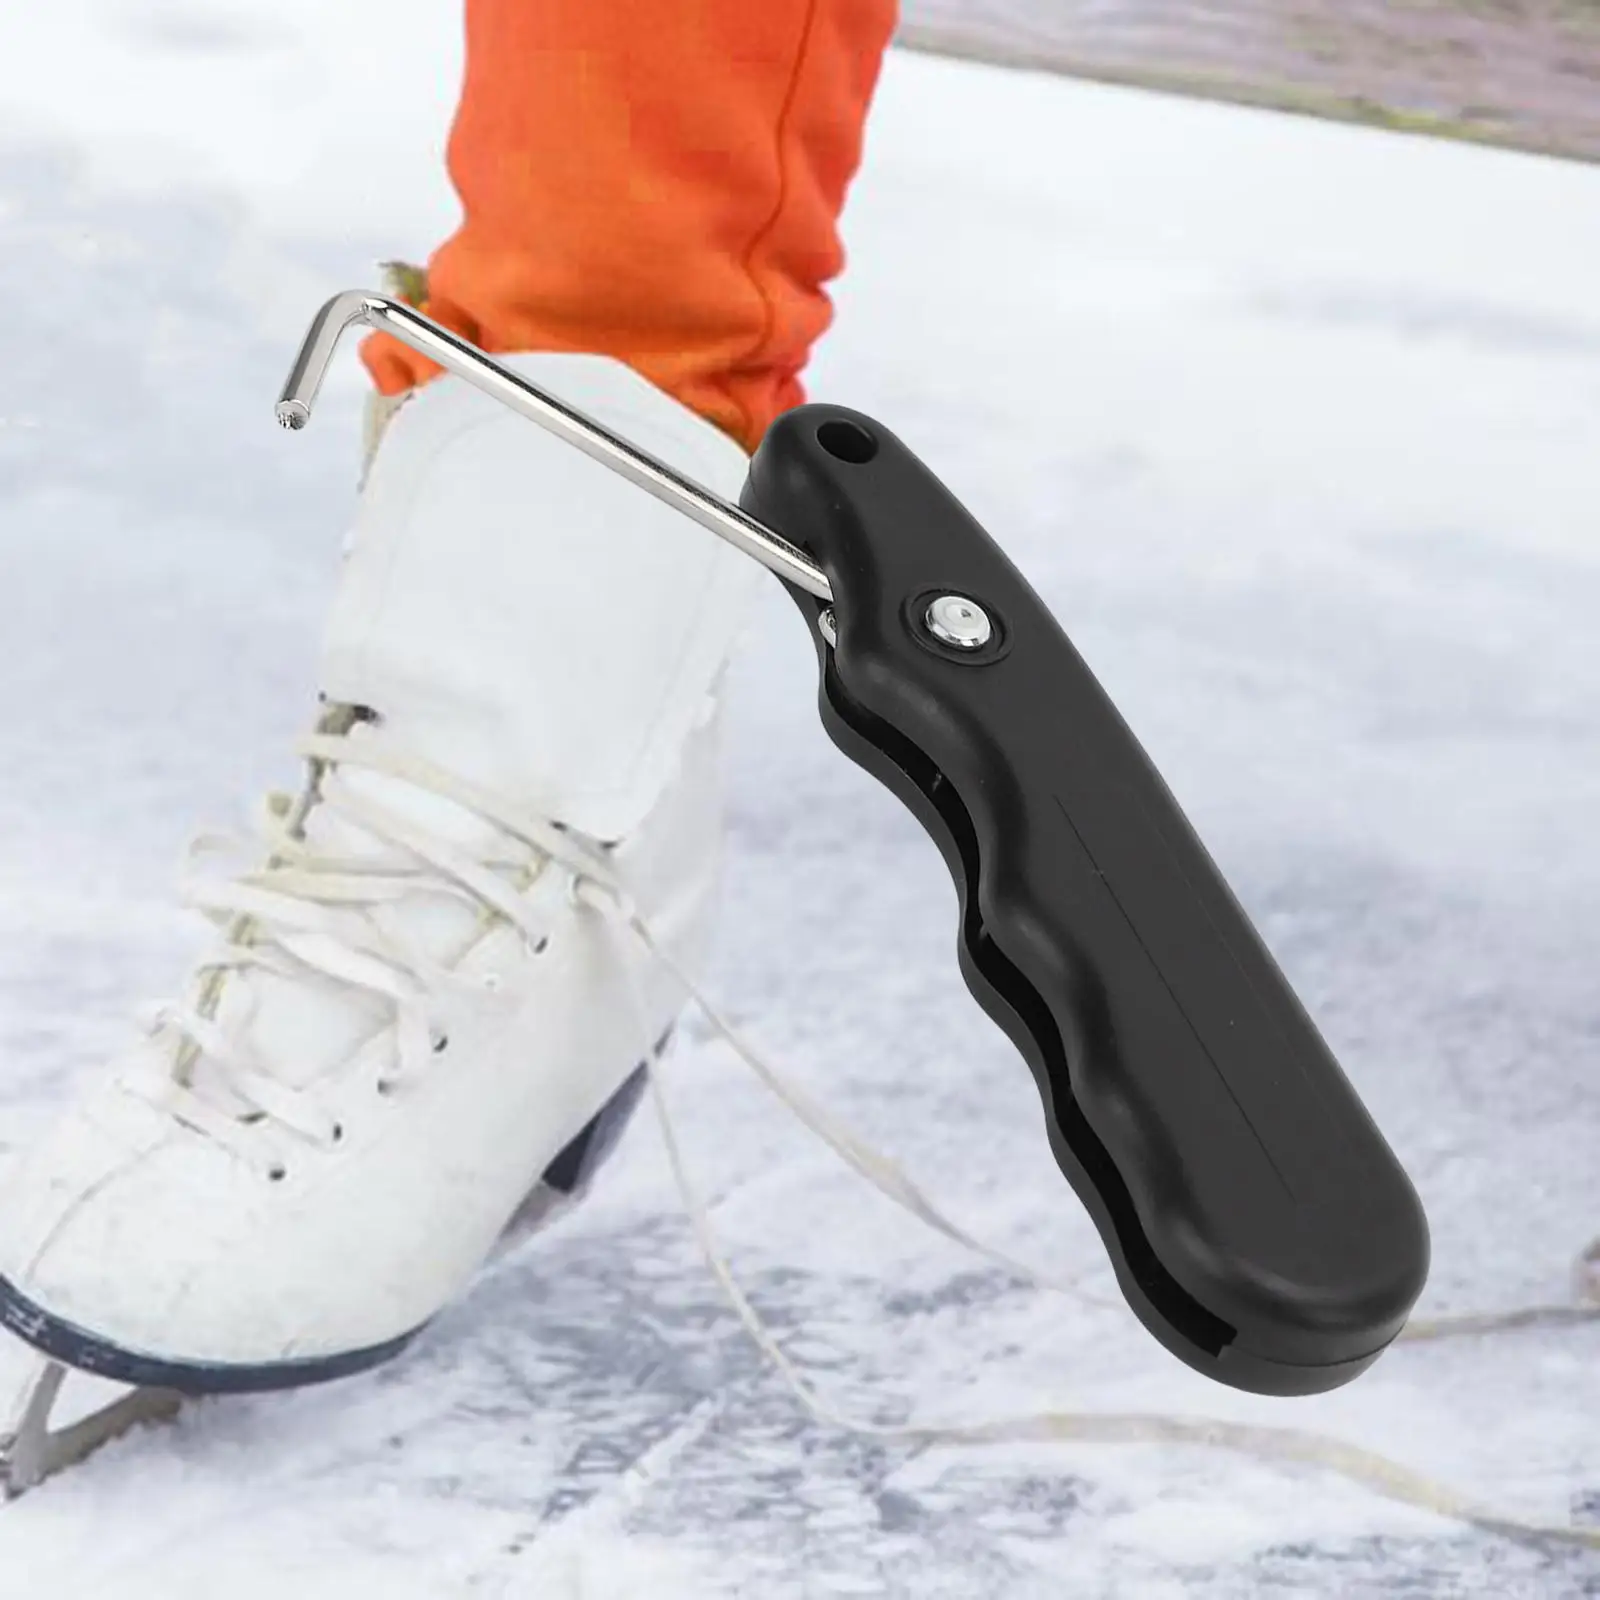 Ice Skate Lace Tightener Convenient Practical for Park Outdoor Figure Skates